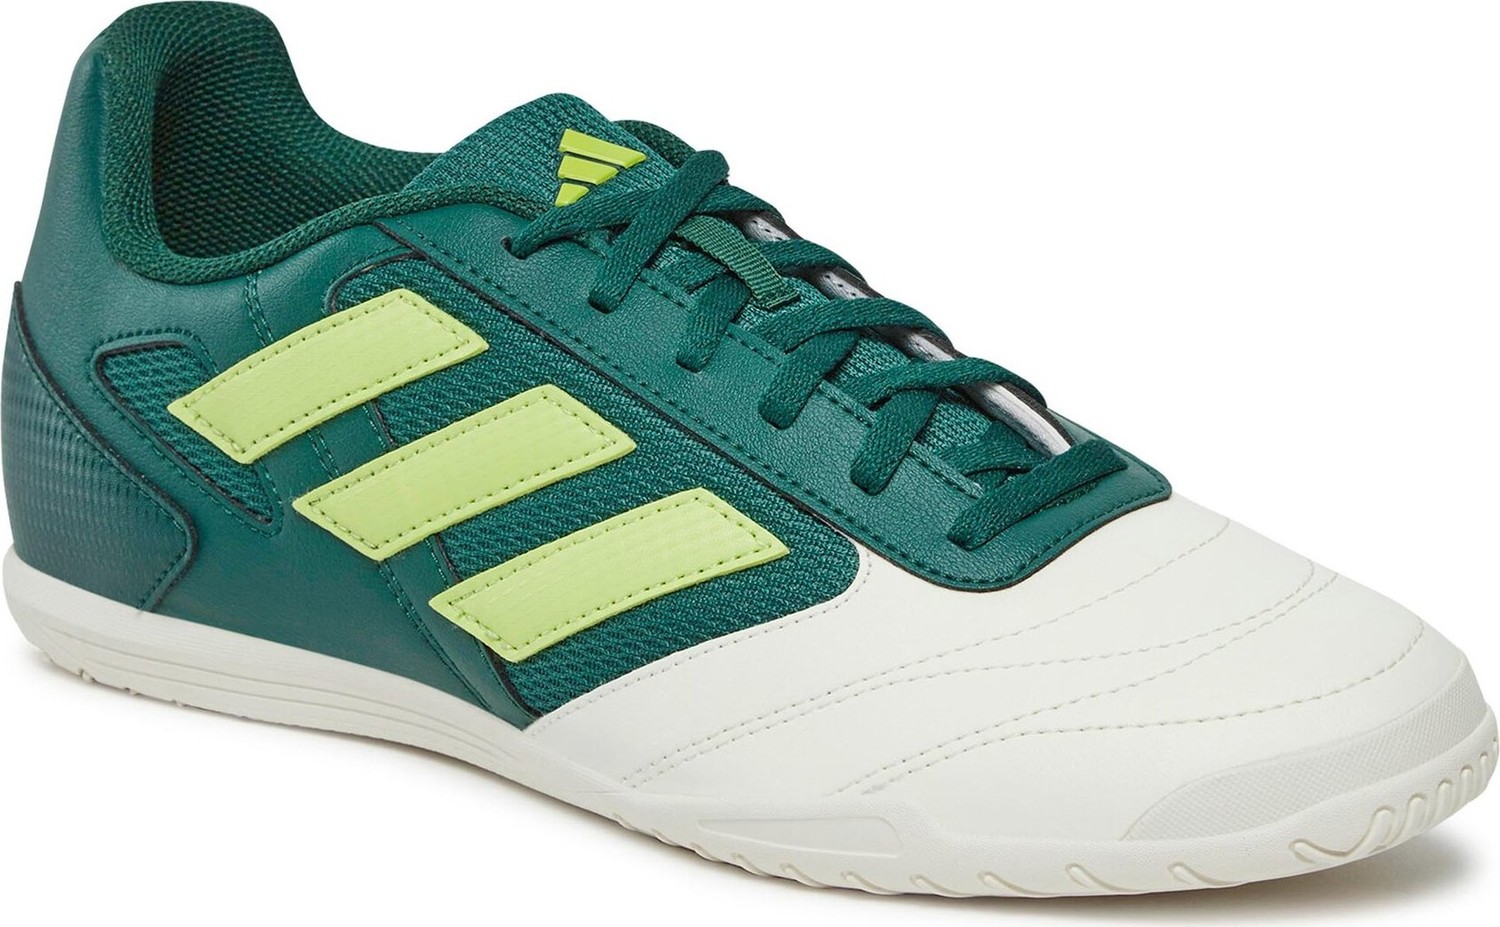 Boty adidas Super Sala 2 Indoor Boots IE1551 Cgreen/Pullim/Owhite